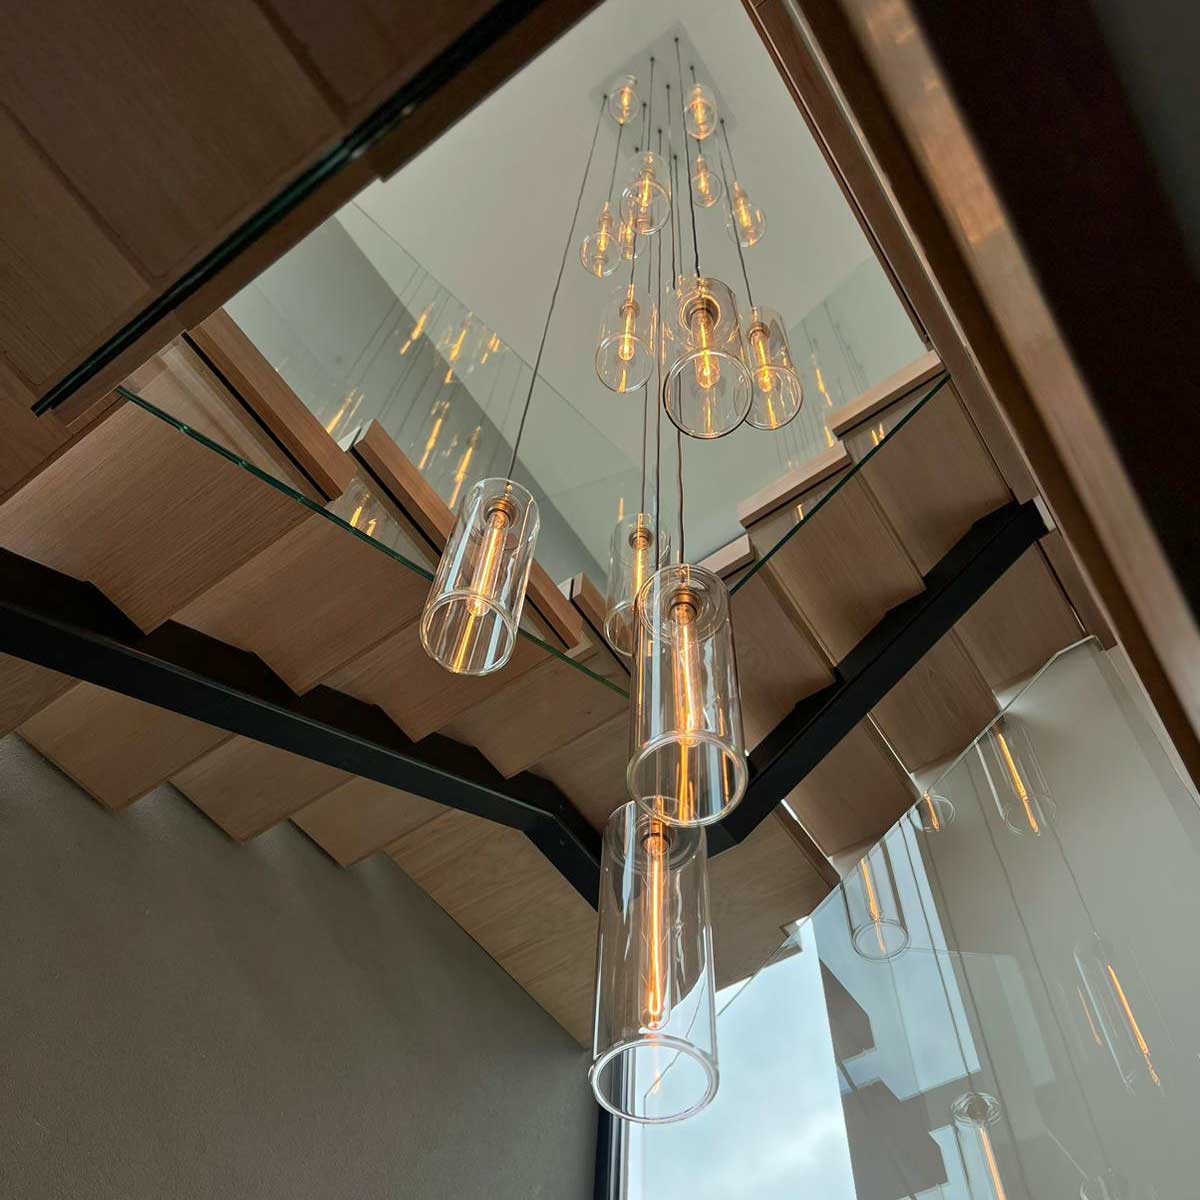 Stairwell with pendant light cluster sold by South Charlotte Fine Lighting and featured on Channel 4's programme Grand Designs